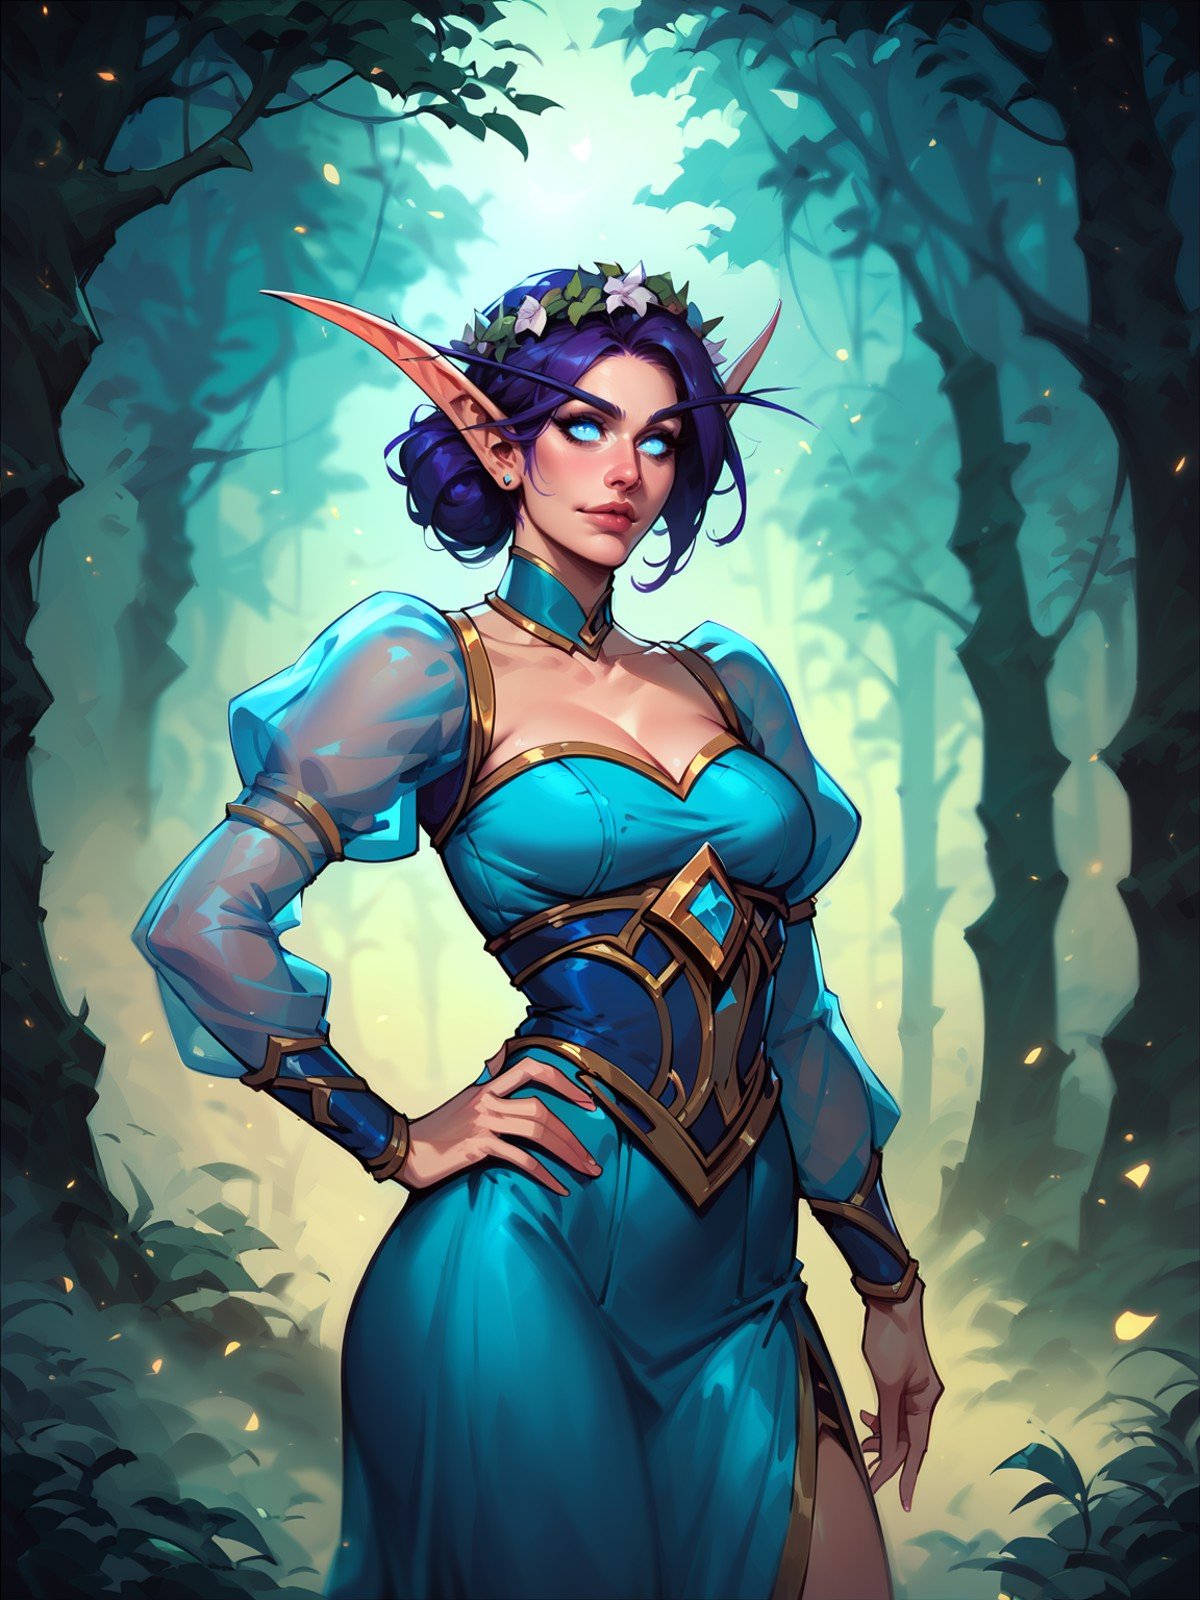 score_8_up, score_7_up, cowboy shot of beautiful elf queen, hand on hip, contrapposto, purple hair, ornate cyan dress with puffy sleeves, see-through sleeves, head wreath, particles, dark forest, night, fog fantasy, warcraft